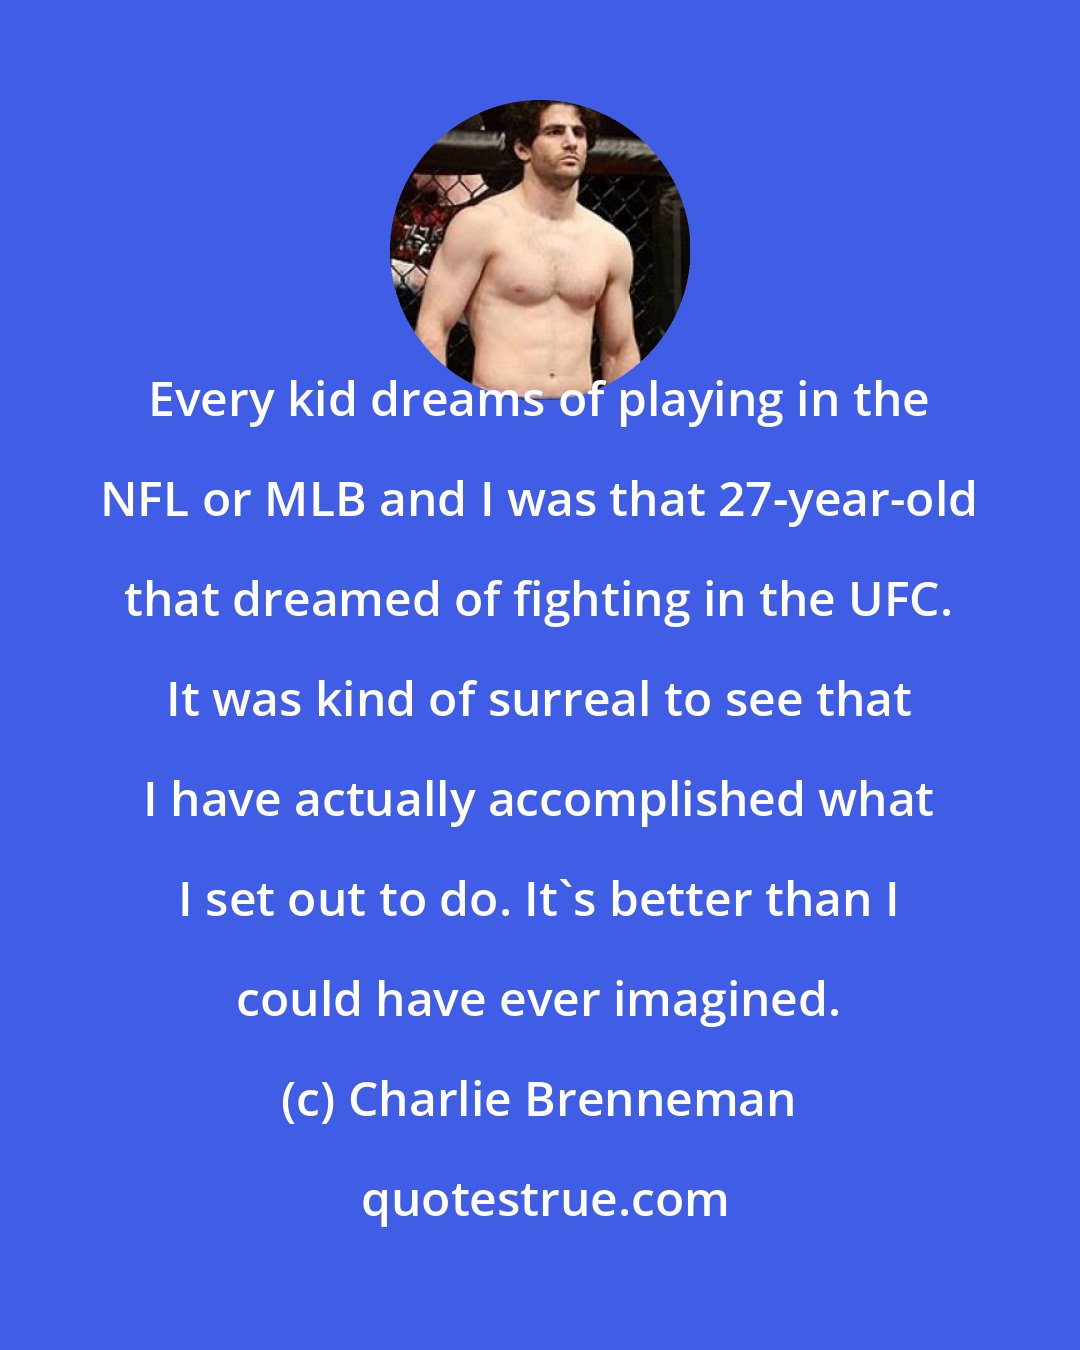 Charlie Brenneman: Every kid dreams of playing in the NFL or MLB and I was that 27-year-old that dreamed of fighting in the UFC. It was kind of surreal to see that I have actually accomplished what I set out to do. It's better than I could have ever imagined.